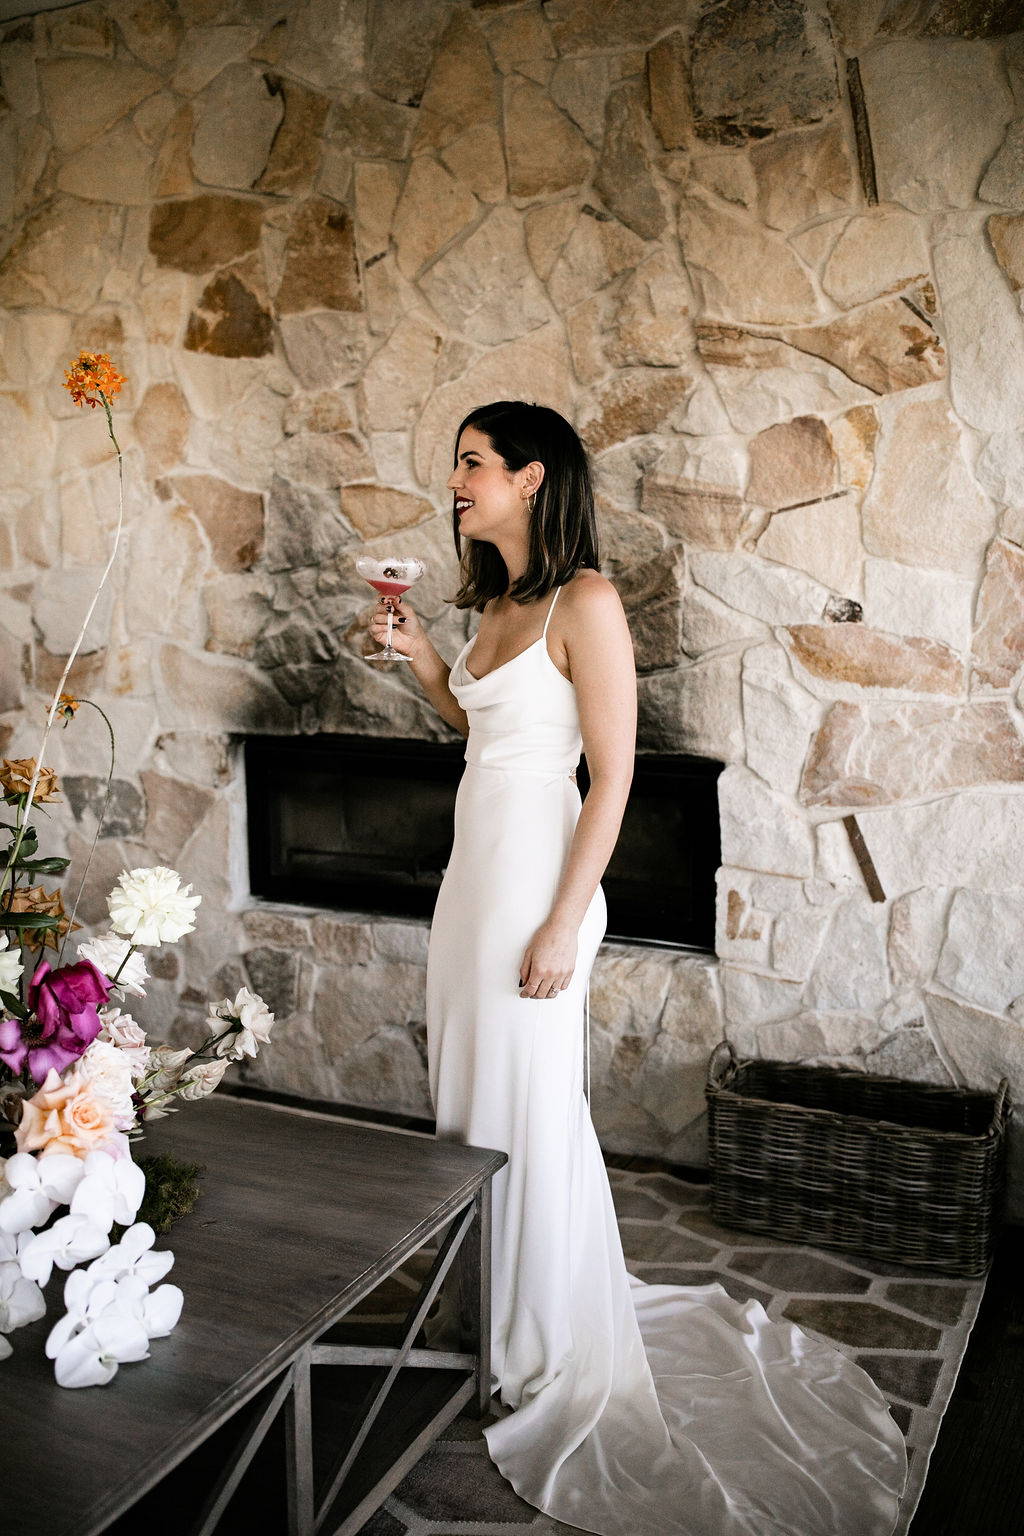 Bride wearing the Grace Loves Lace Honey wedding dress toasting at her wedding